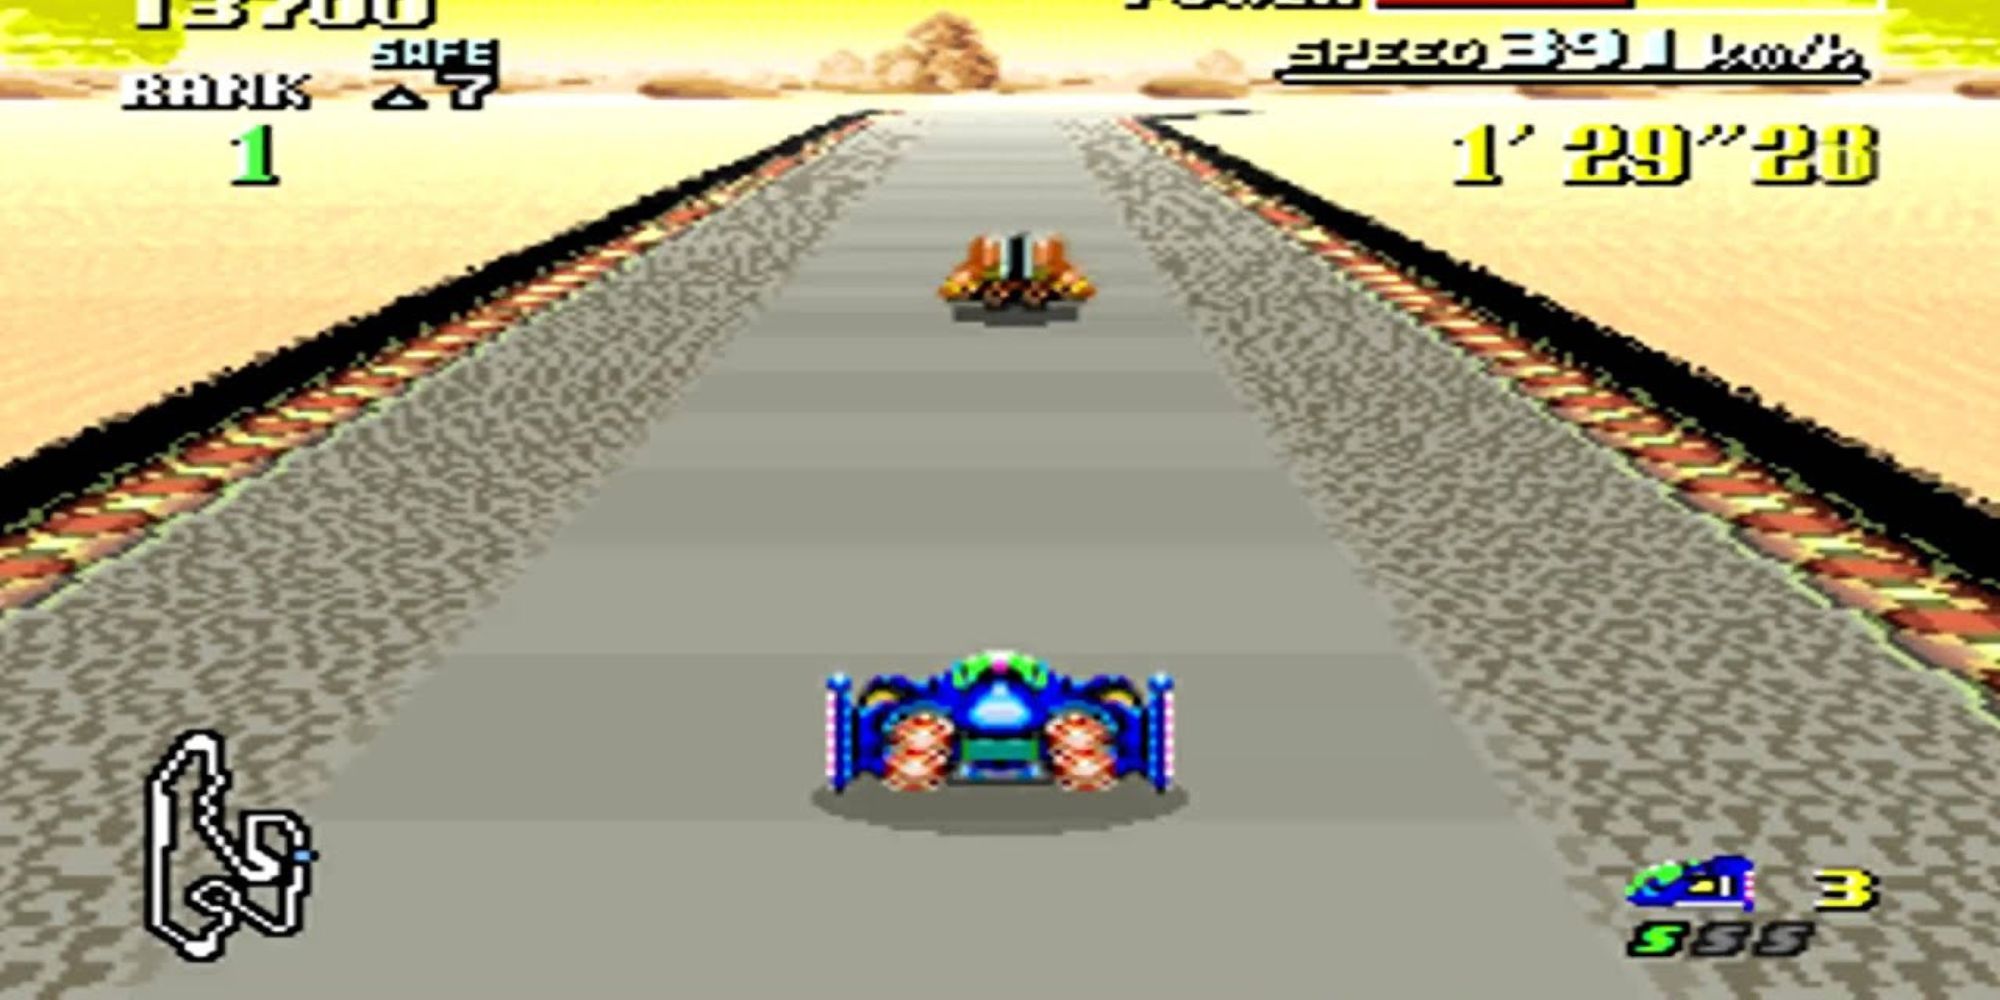 The Blue Falcon drives on the Sand Ocean track